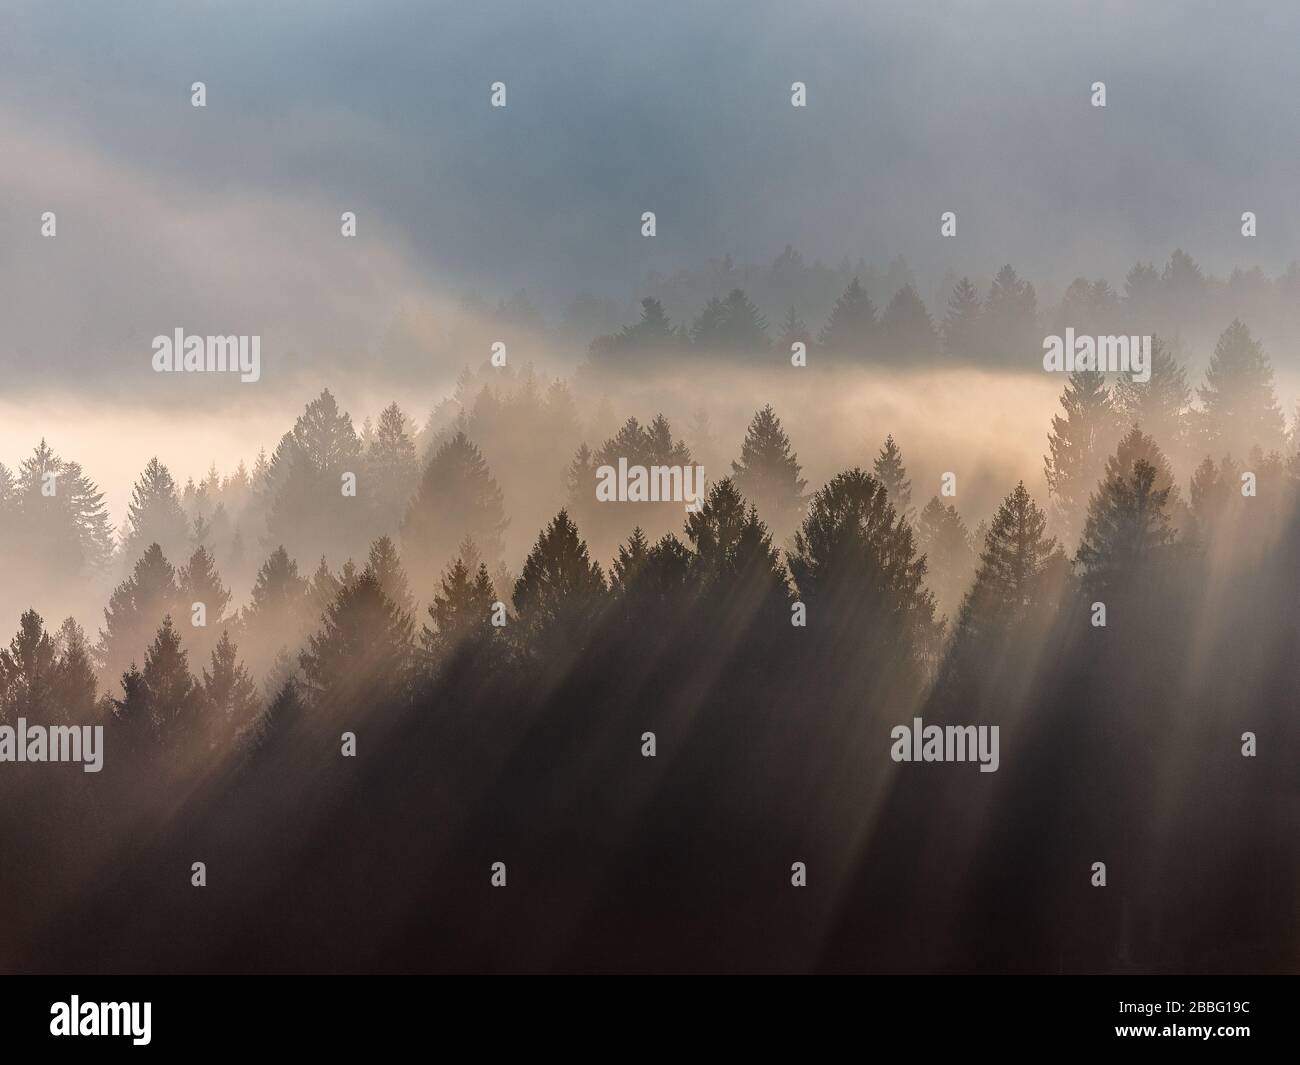 The Cansiglio coniferous forest. Sunlight at sunrise, beams of light on  trees through the fog. Evocative mountain landscape. Prealpi Venete, Italy. Stock Photo